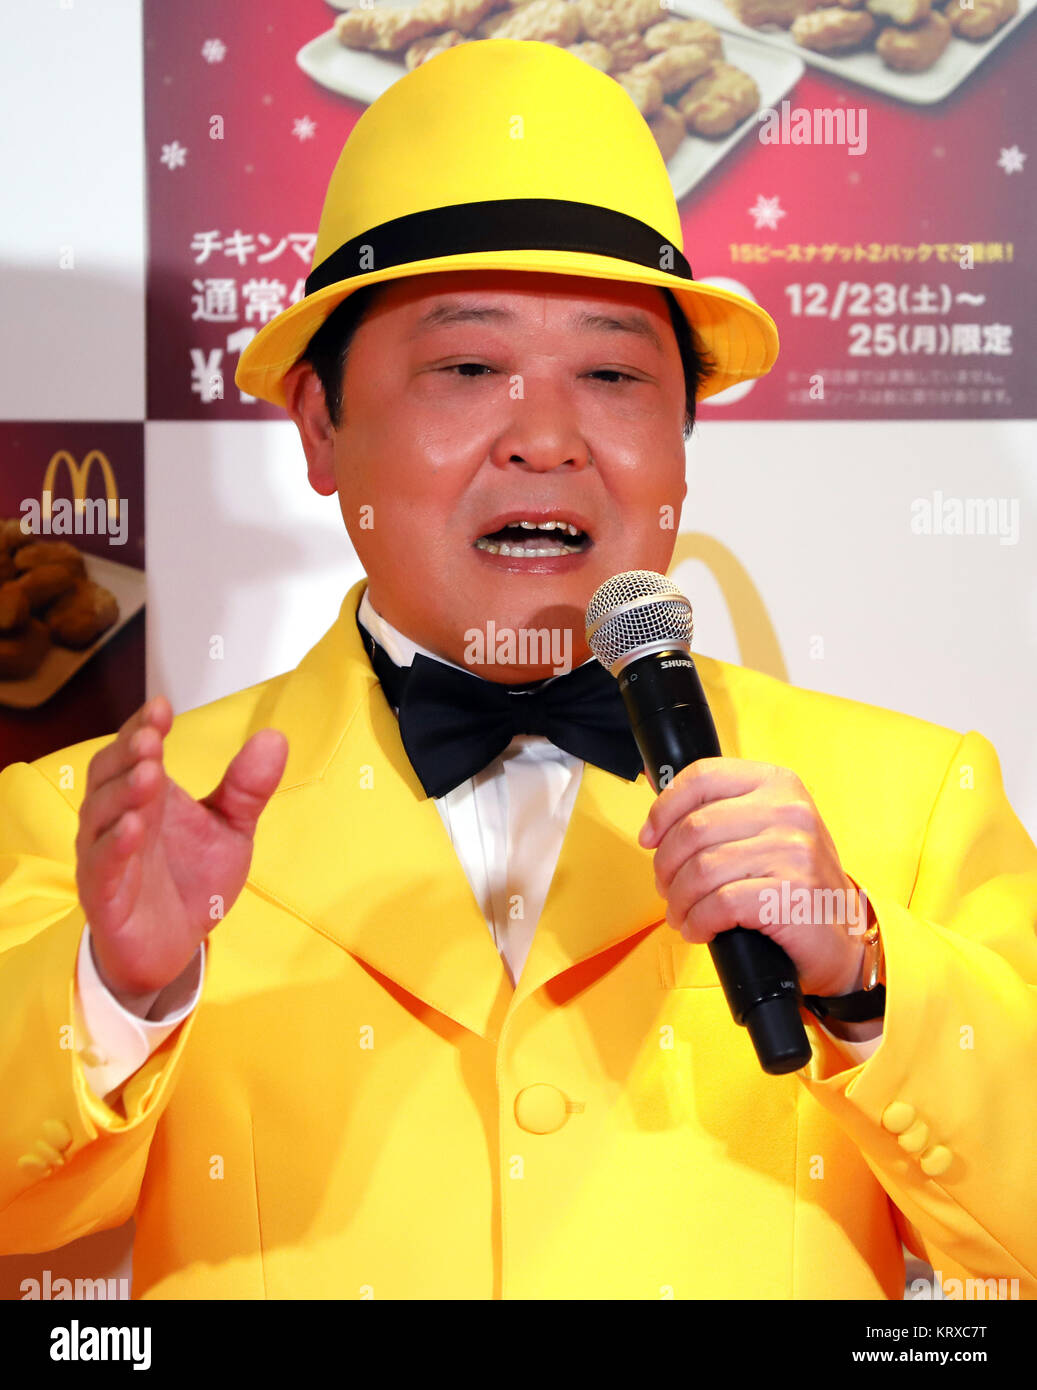 Tokyo, Japan. 21st Dec, 2017. Japan's comedy trio Dacho-Club member Ryuhei Ueshima attends a promotional event of McDonald's Japan's Chicken McNuggets in Tokyo on Thursday, December 21, 2017. McDonald's Japan will have a campaign for their Chicken McNuggets with a discount price and special flabored dipping saurces. Credit: Yoshio Tsunoda/AFLO/Alamy Live News Stock Photo